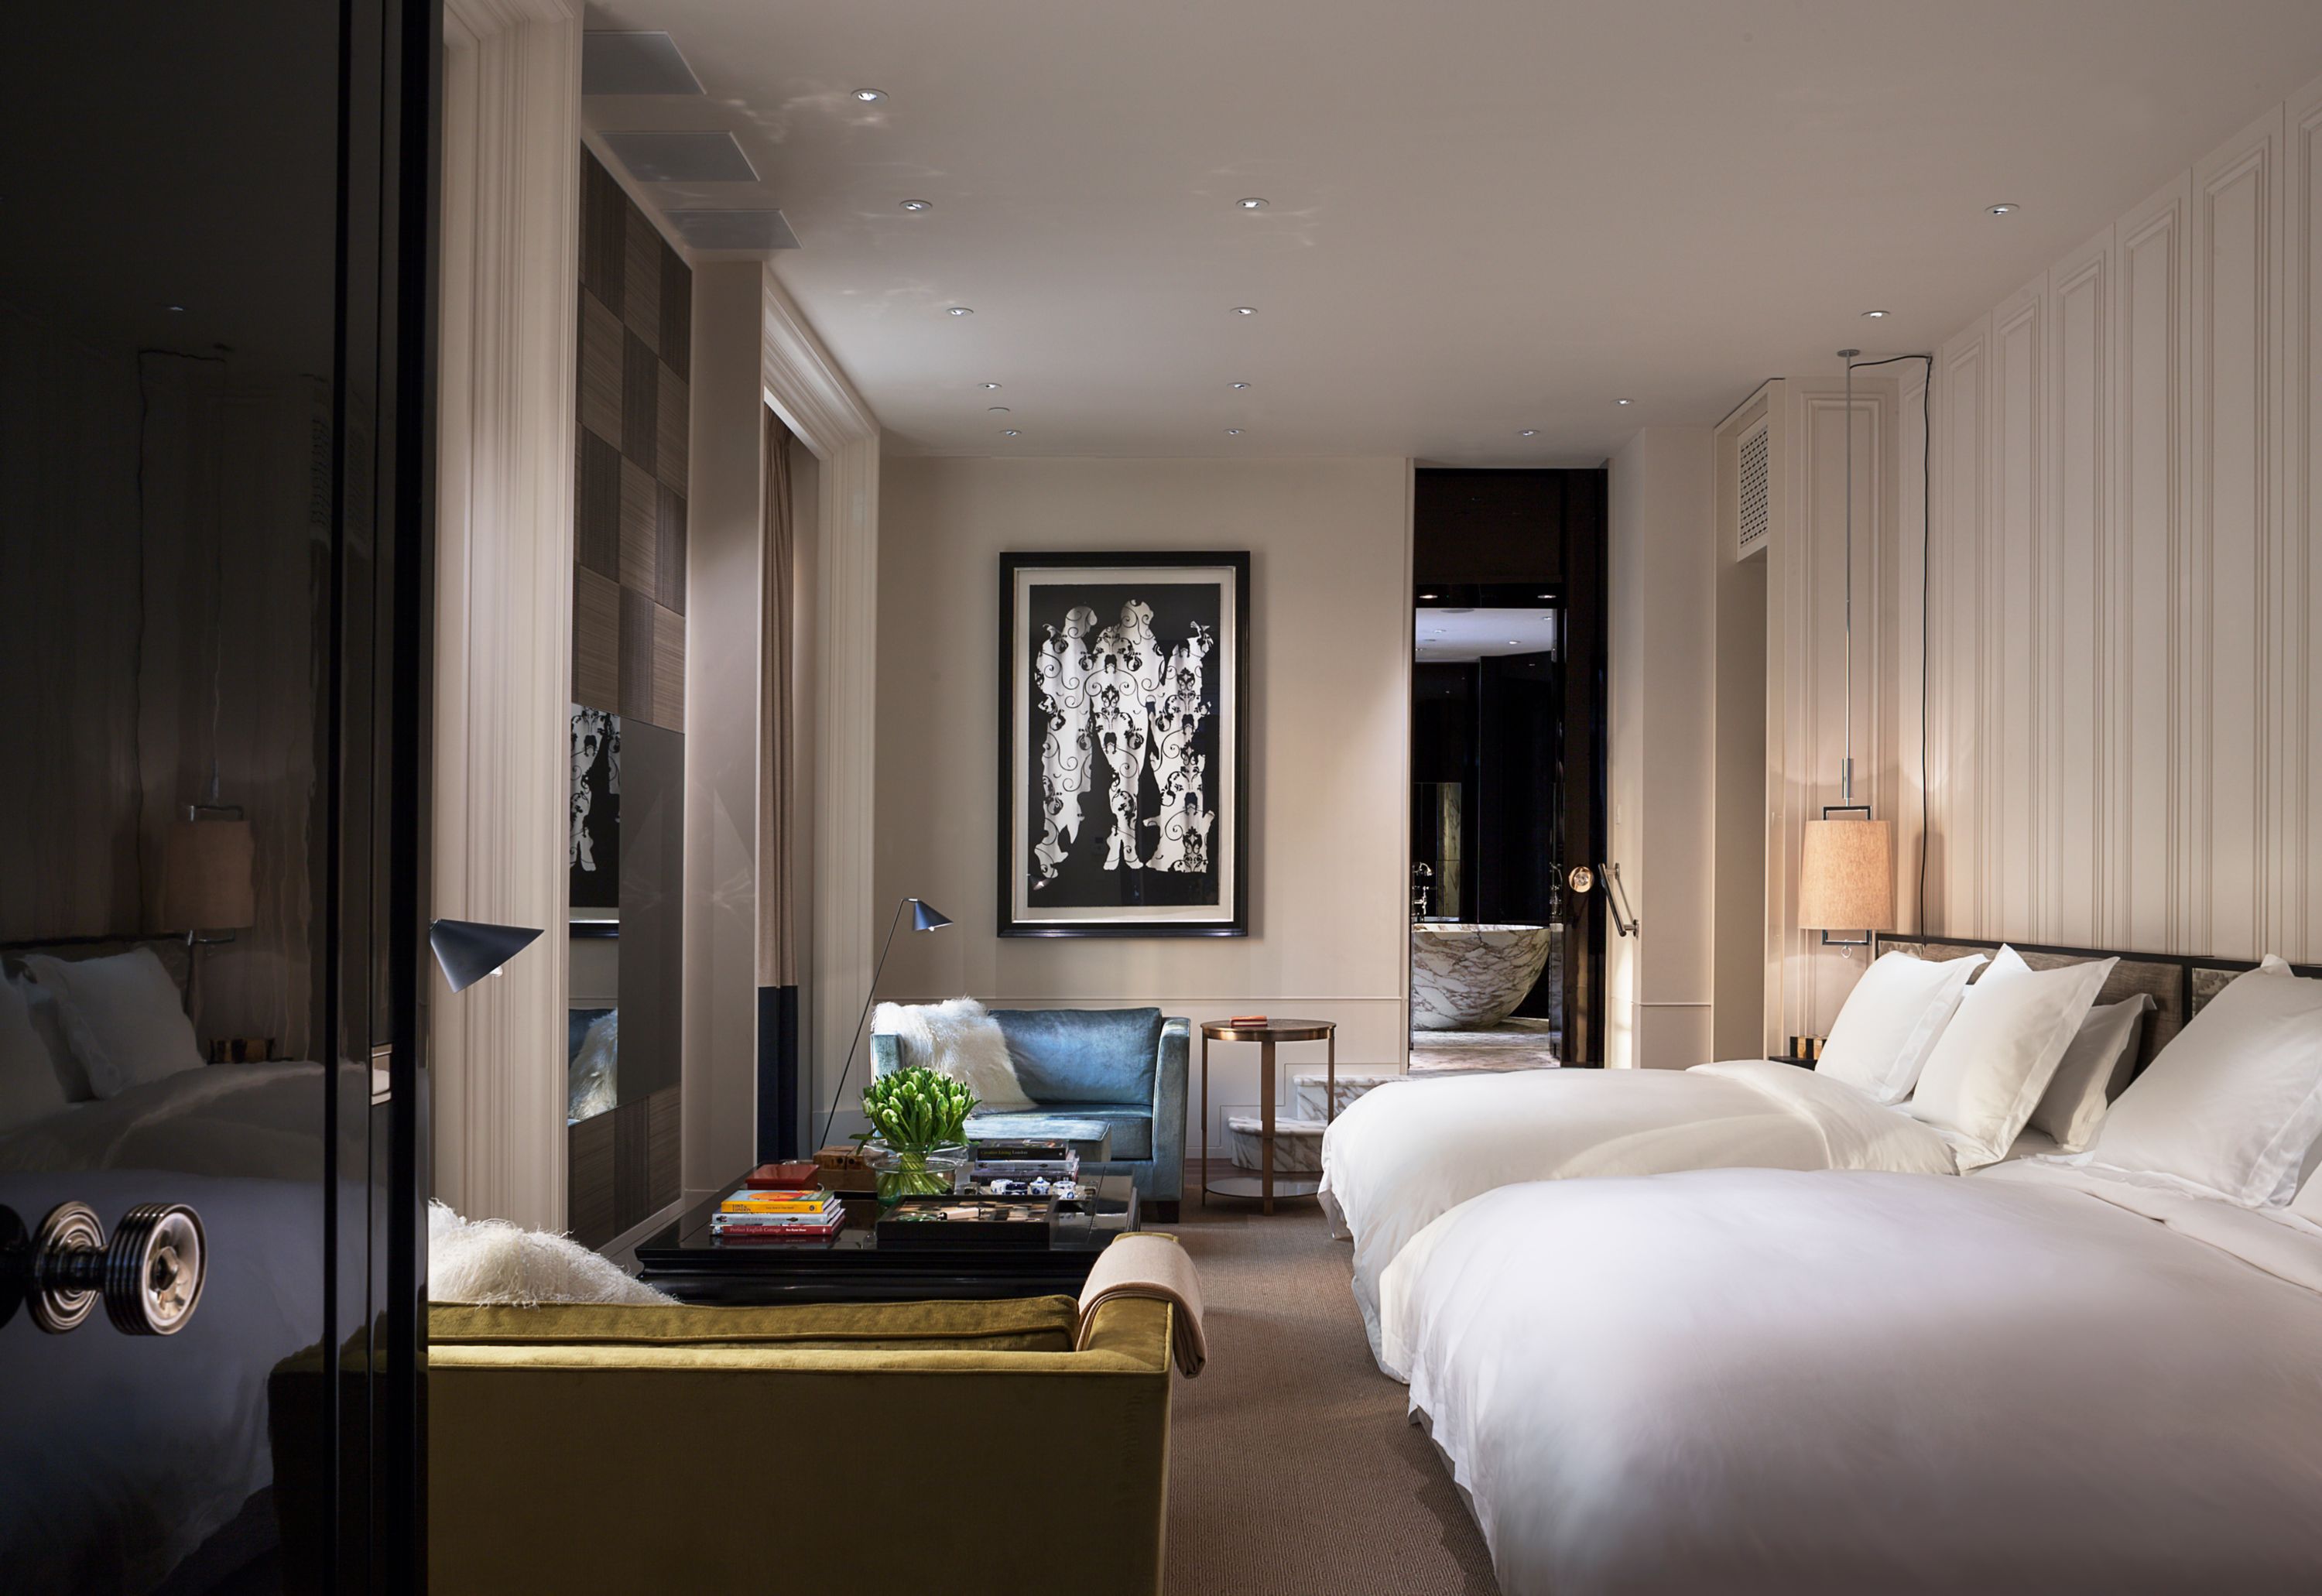 Manor House Suite at Rosewood London | Luxury London Hotel